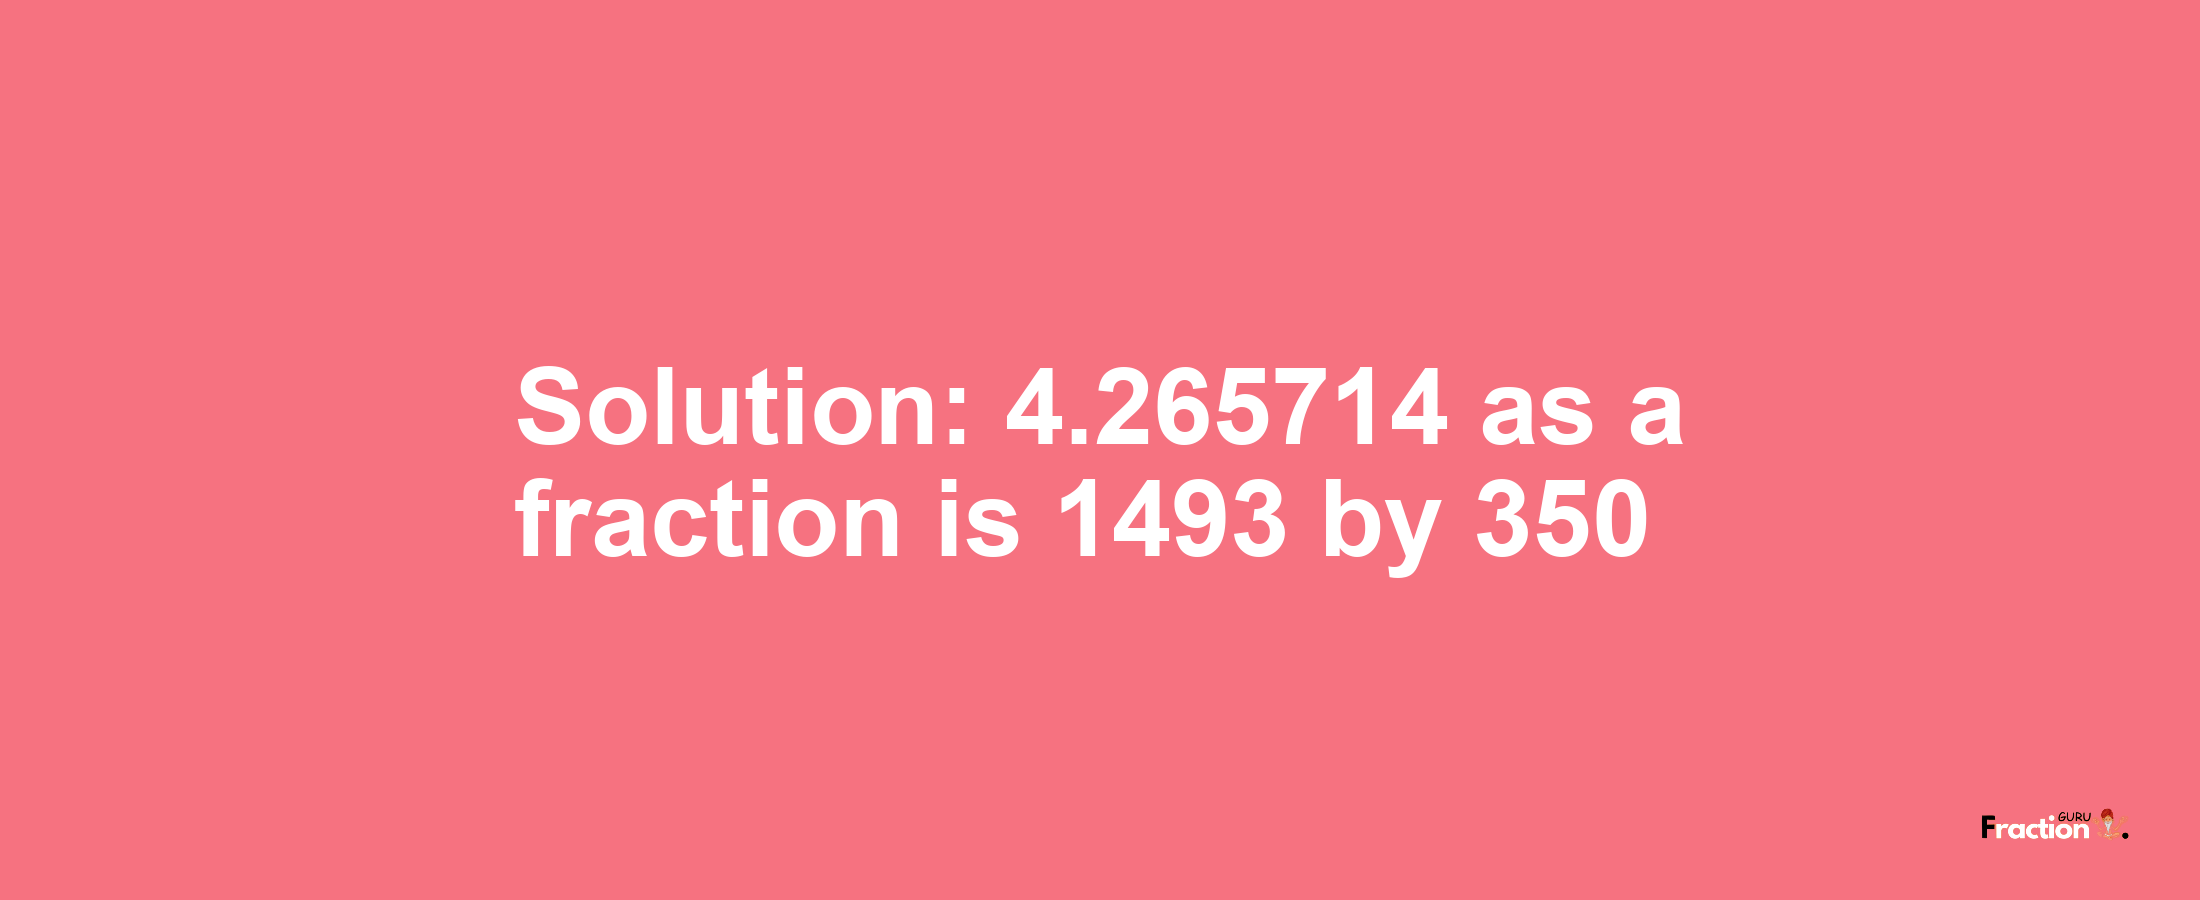 Solution:4.265714 as a fraction is 1493/350